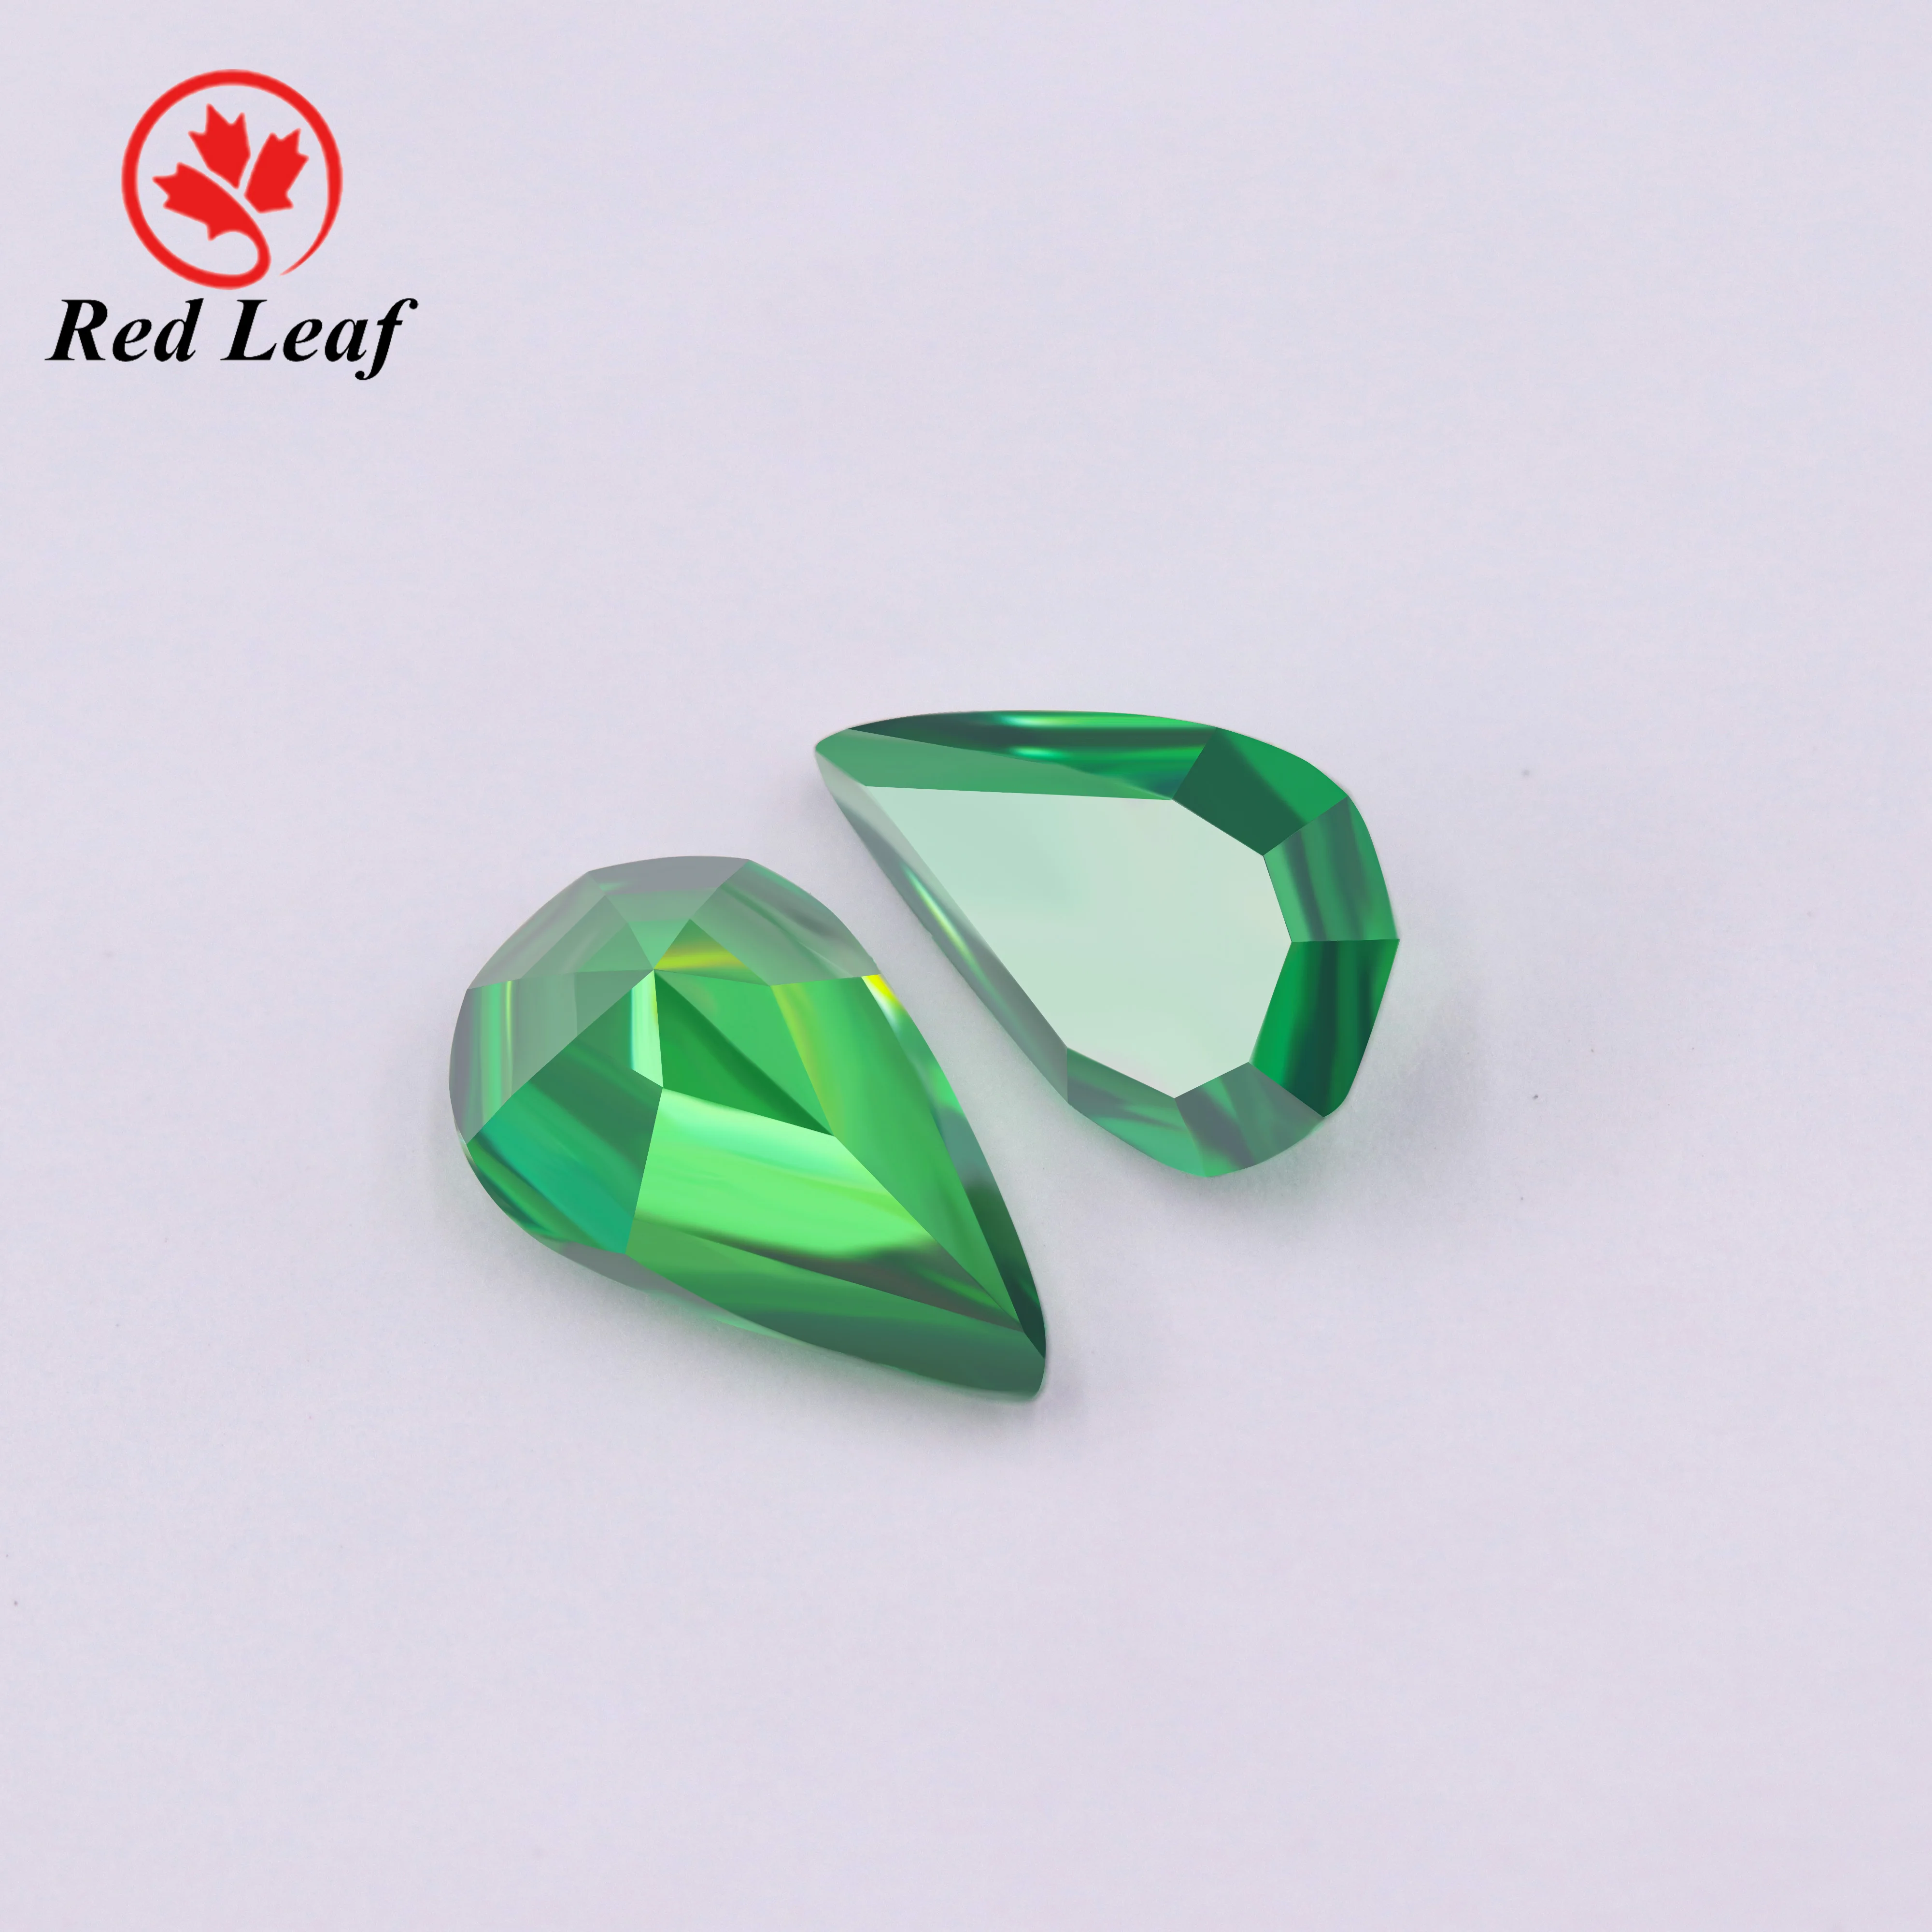 

Redleaf Jewelry high cz quality pear shape emerald green color stone wholesale loose gemstone cubic zirconia stones